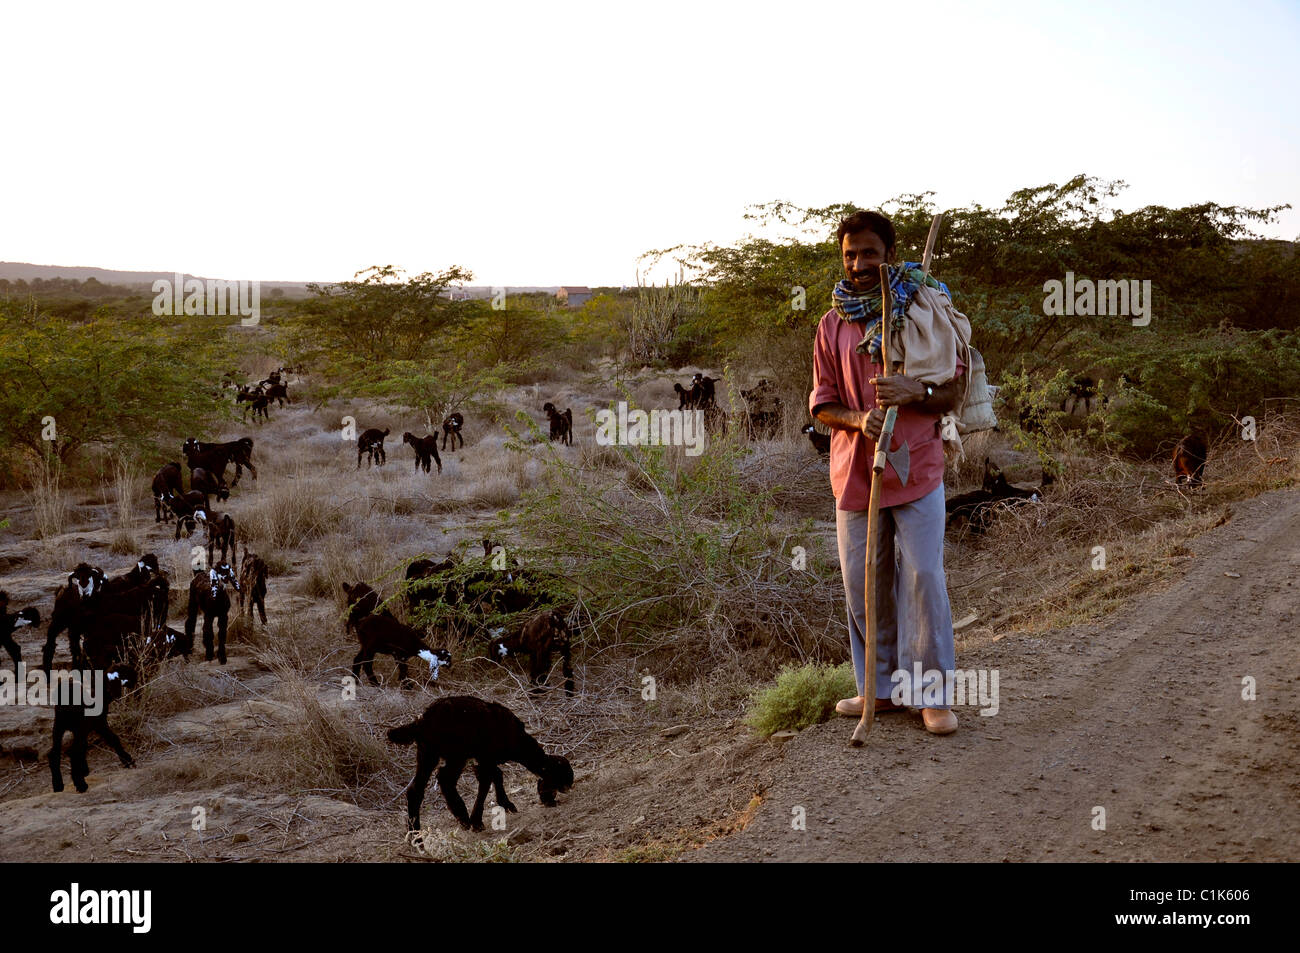 A shepherd with goats in rural India Stock Photo